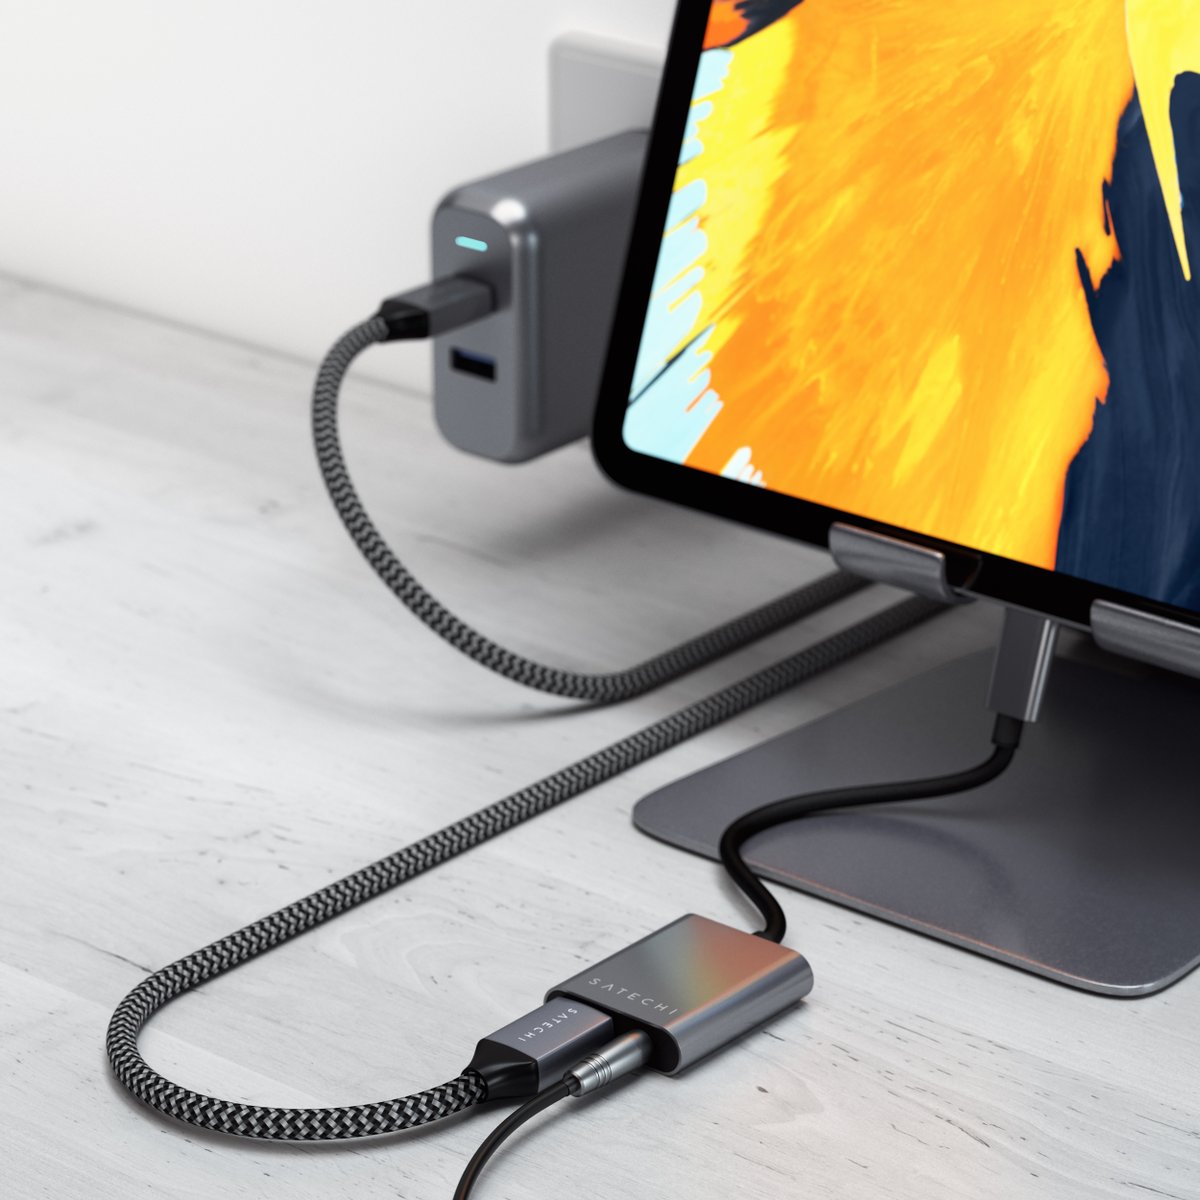 Satechi Releases USB-C to 3.5mm Headphone Jack Adapter, 100W USB-C Charging Cable